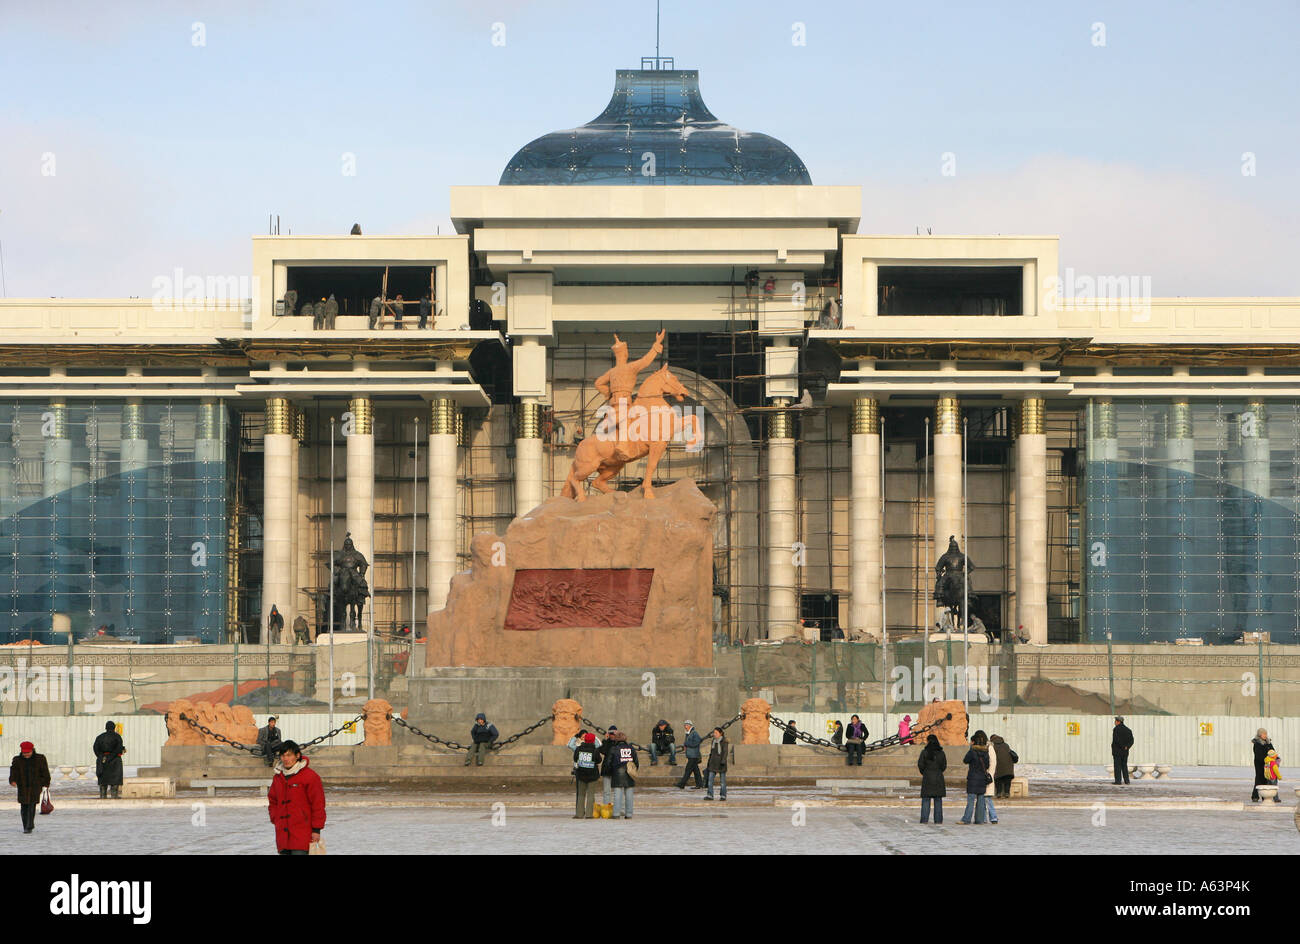 Mongolia - Ulan Baatar Sukhbaatar square with the building site of the renovated parliament building Stock Photo